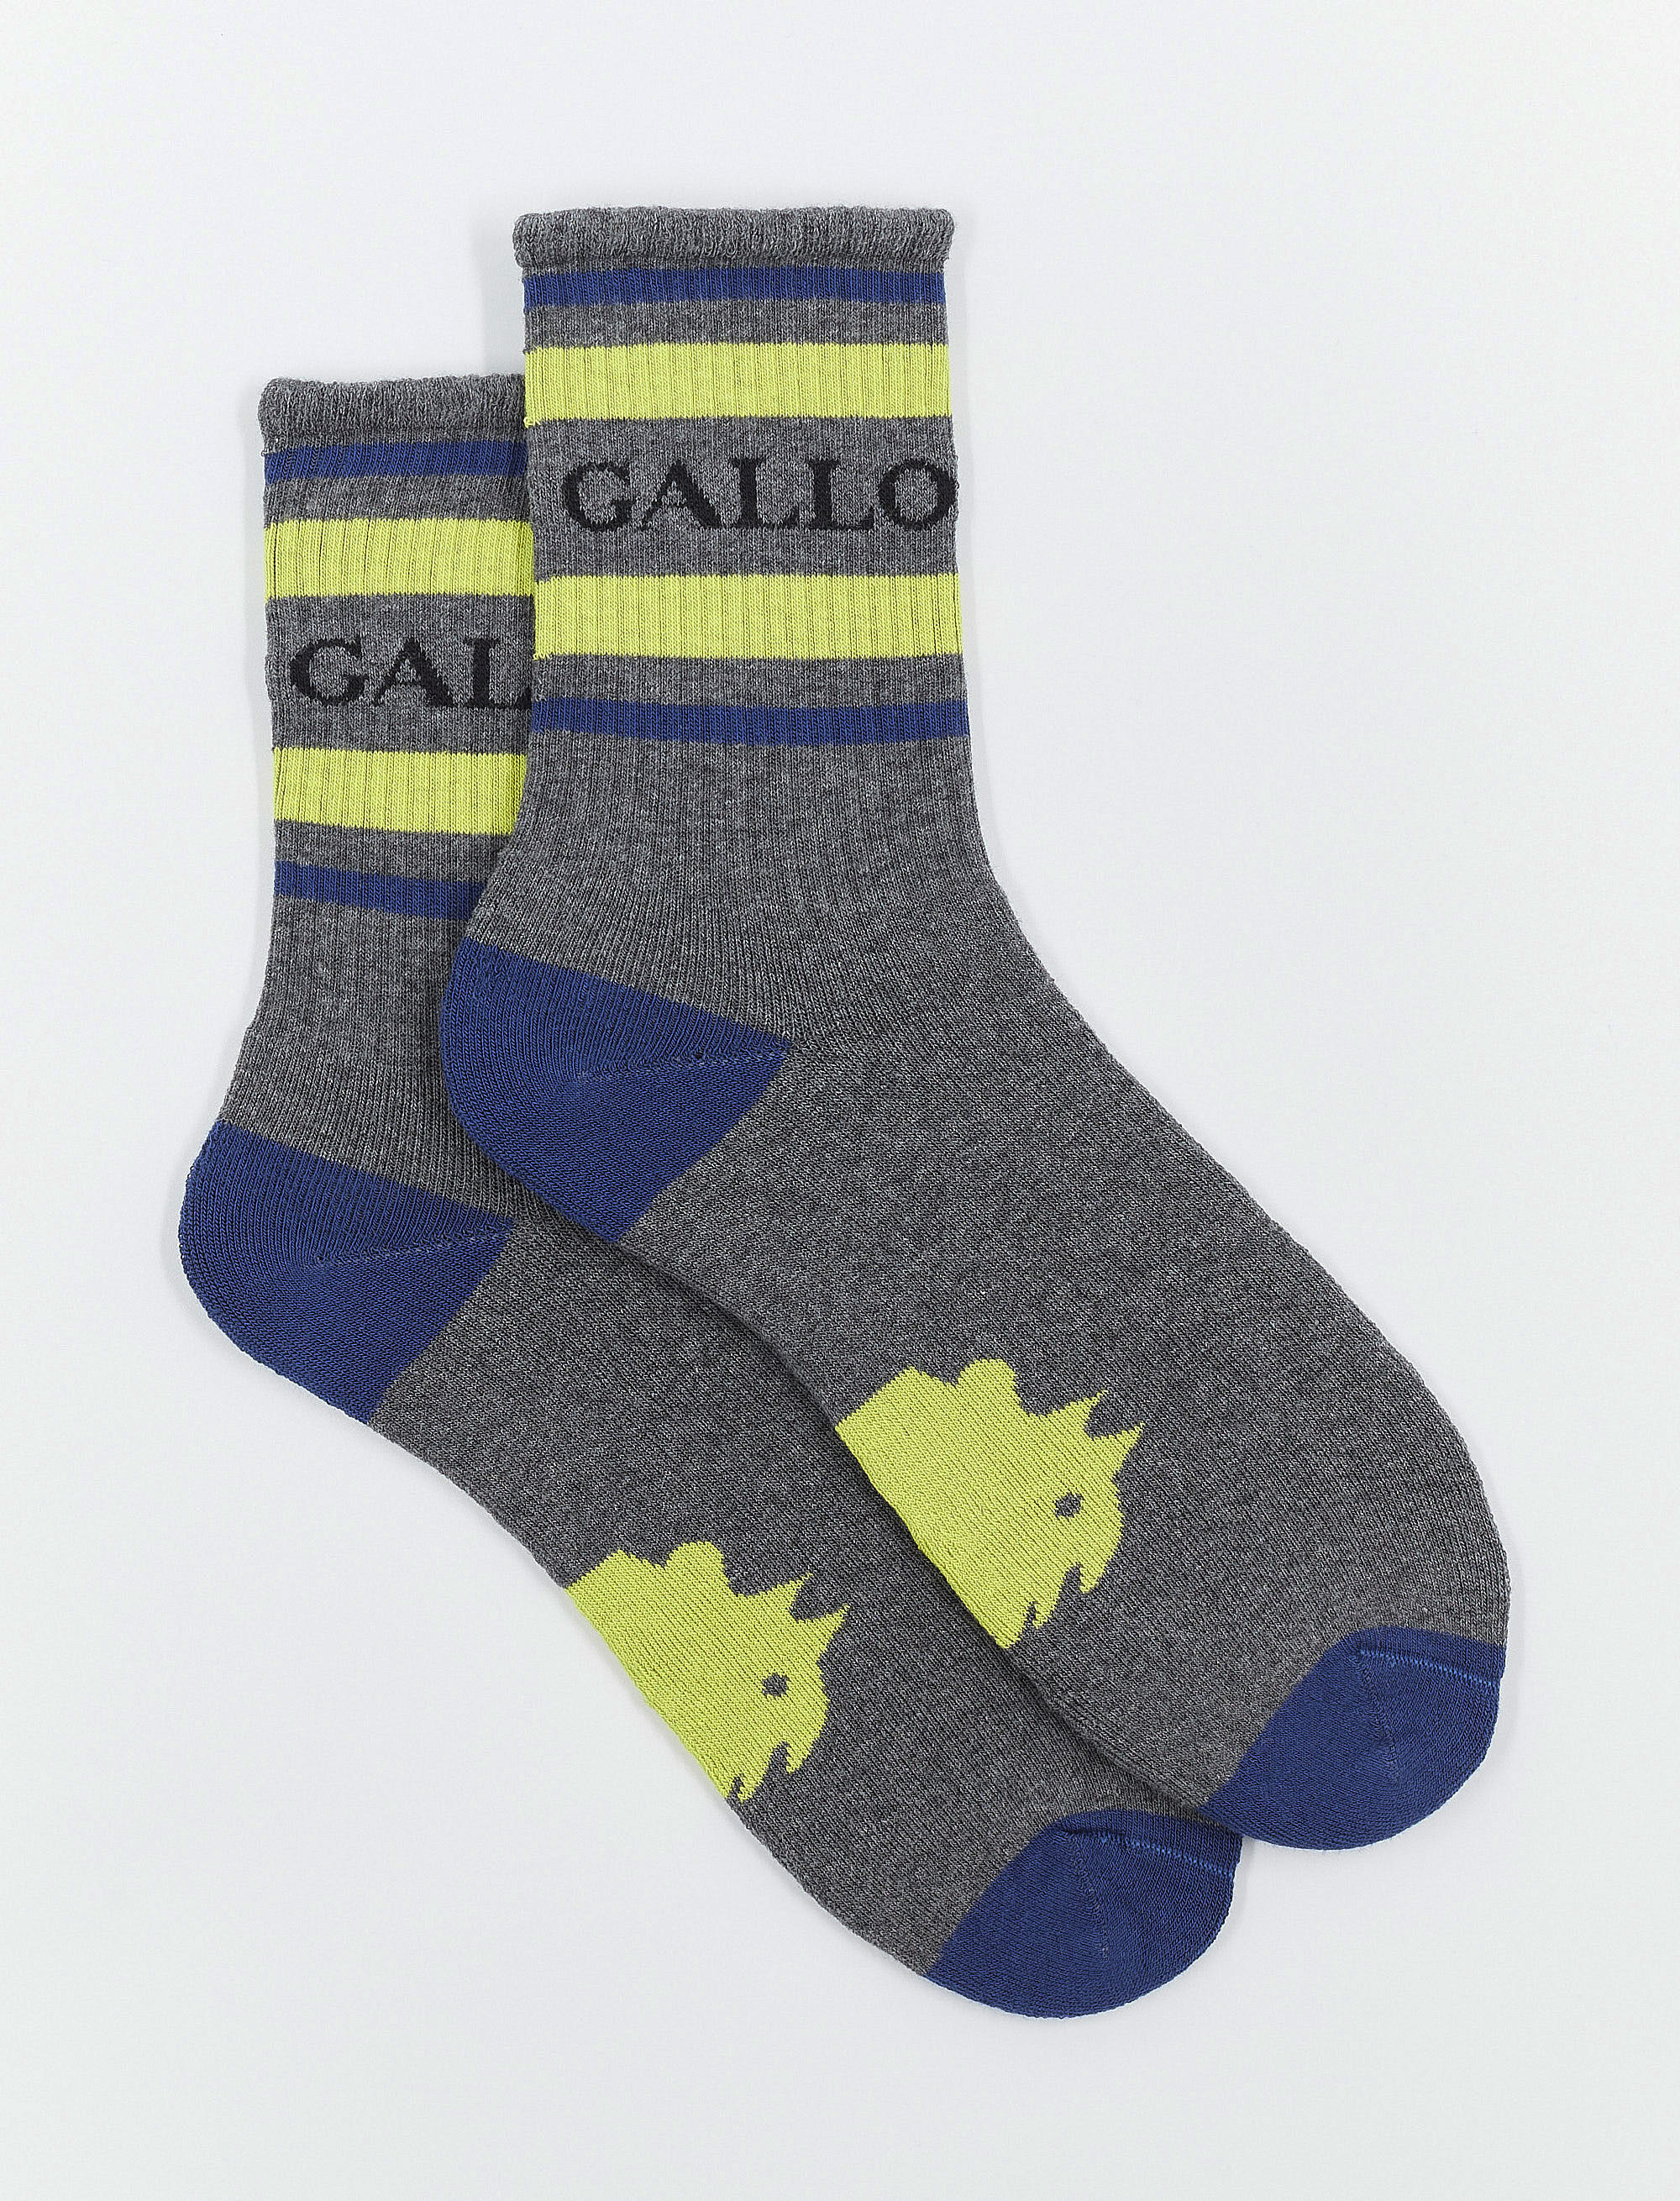 Women's short pyrite cotton terry cloth socks with Gallo writing | Gallo 1927 - Official Online Shop